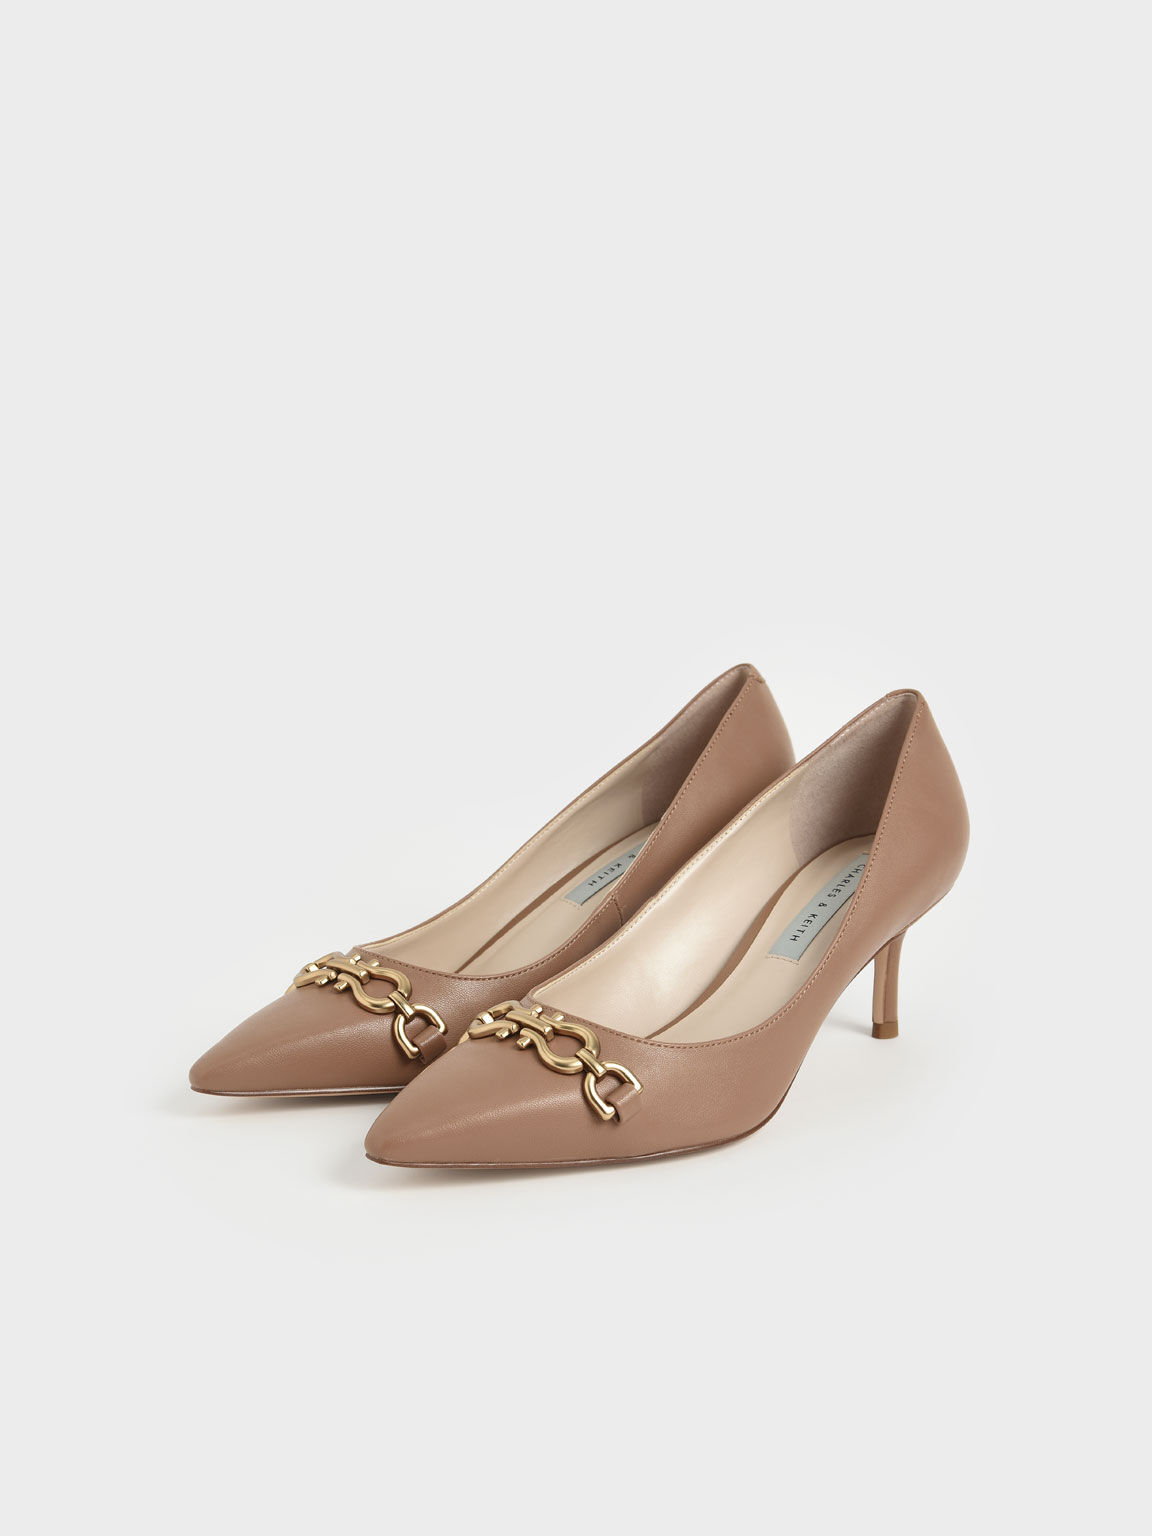 Chain Link Pointed Toe Pumps, Camel, hi-res